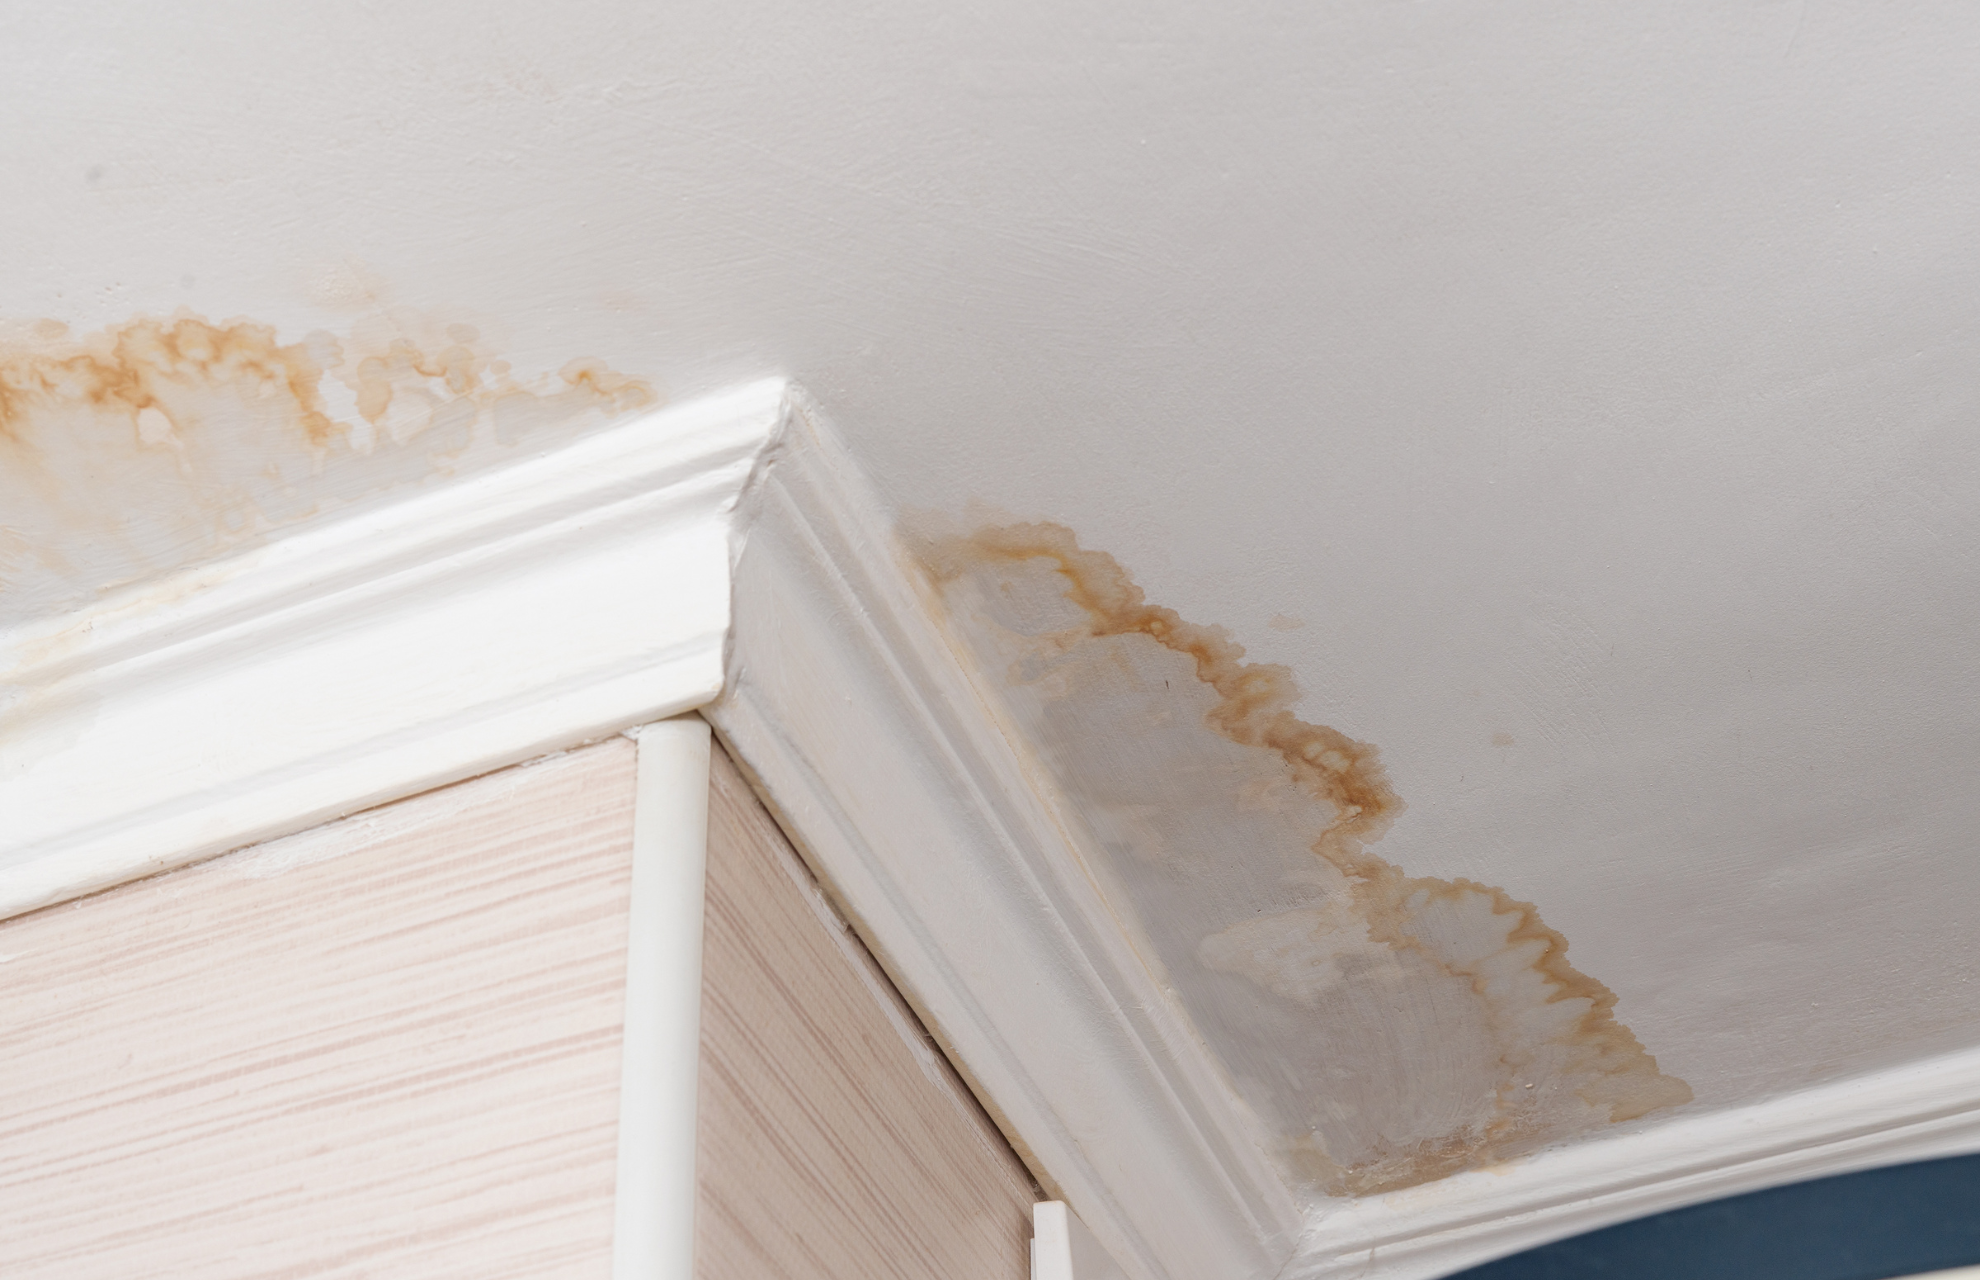 Ceiling with stains due to leaking water